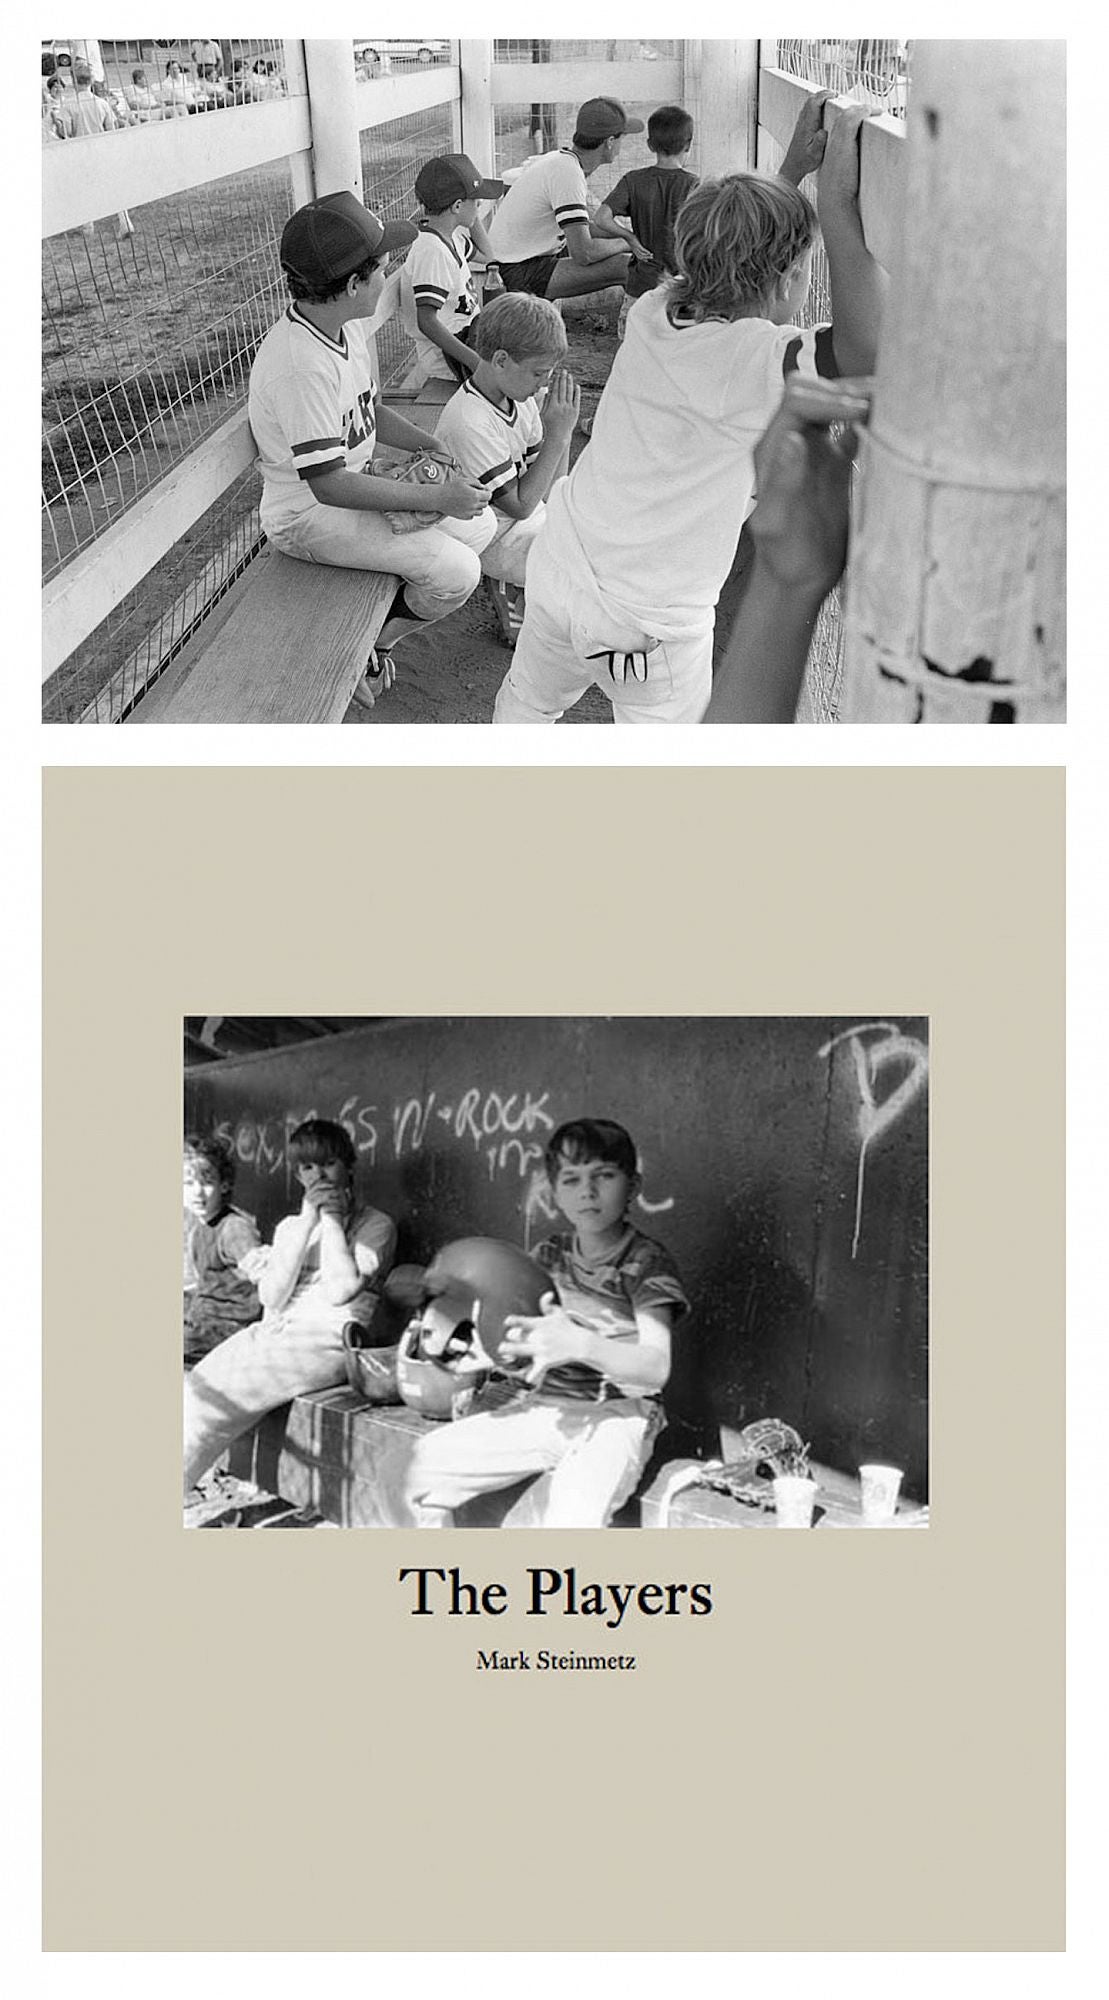 Mark Steinmetz: The Players, Special Limited Edition (with Gelatin Silver Print)